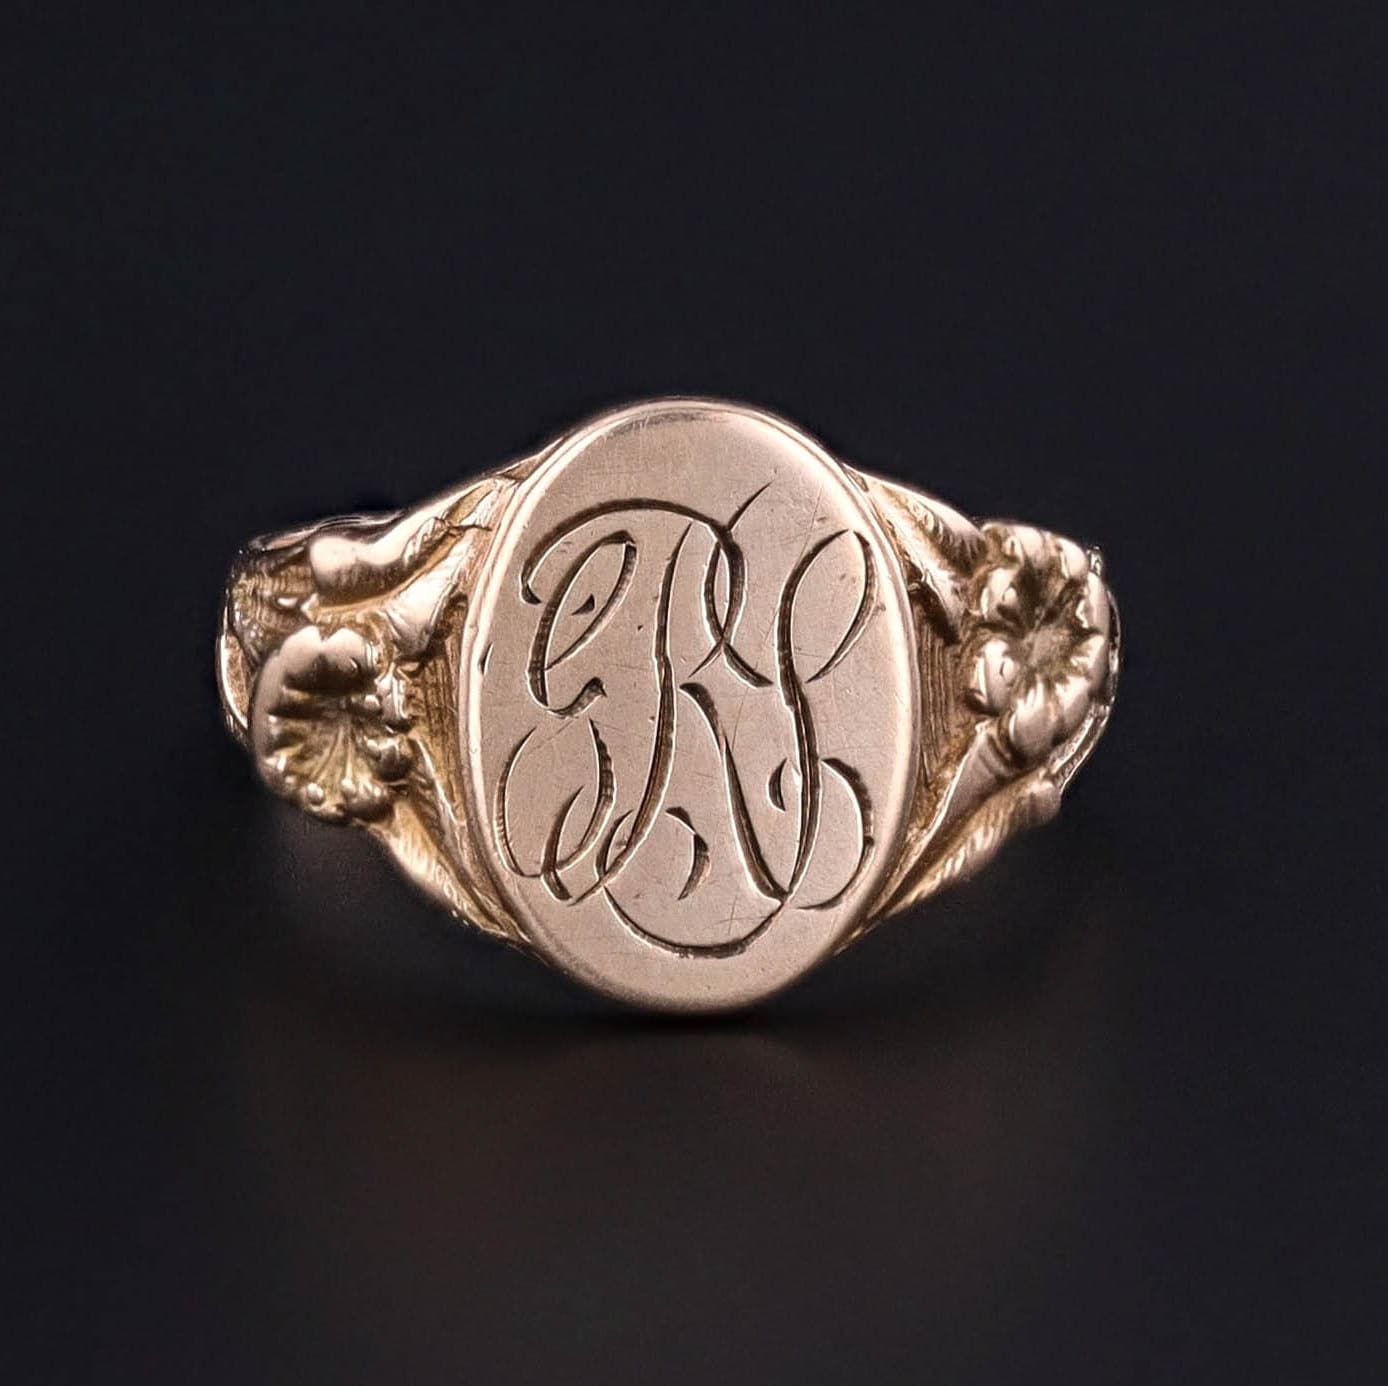 Antique Signet Ring: Step into the elegance of the early 20th century with this antique signet (circa 1900) featuring the initials &#39;GRY&#39; engraved on the face. The 10k gold ring has an elegant floral design on the shoulders.